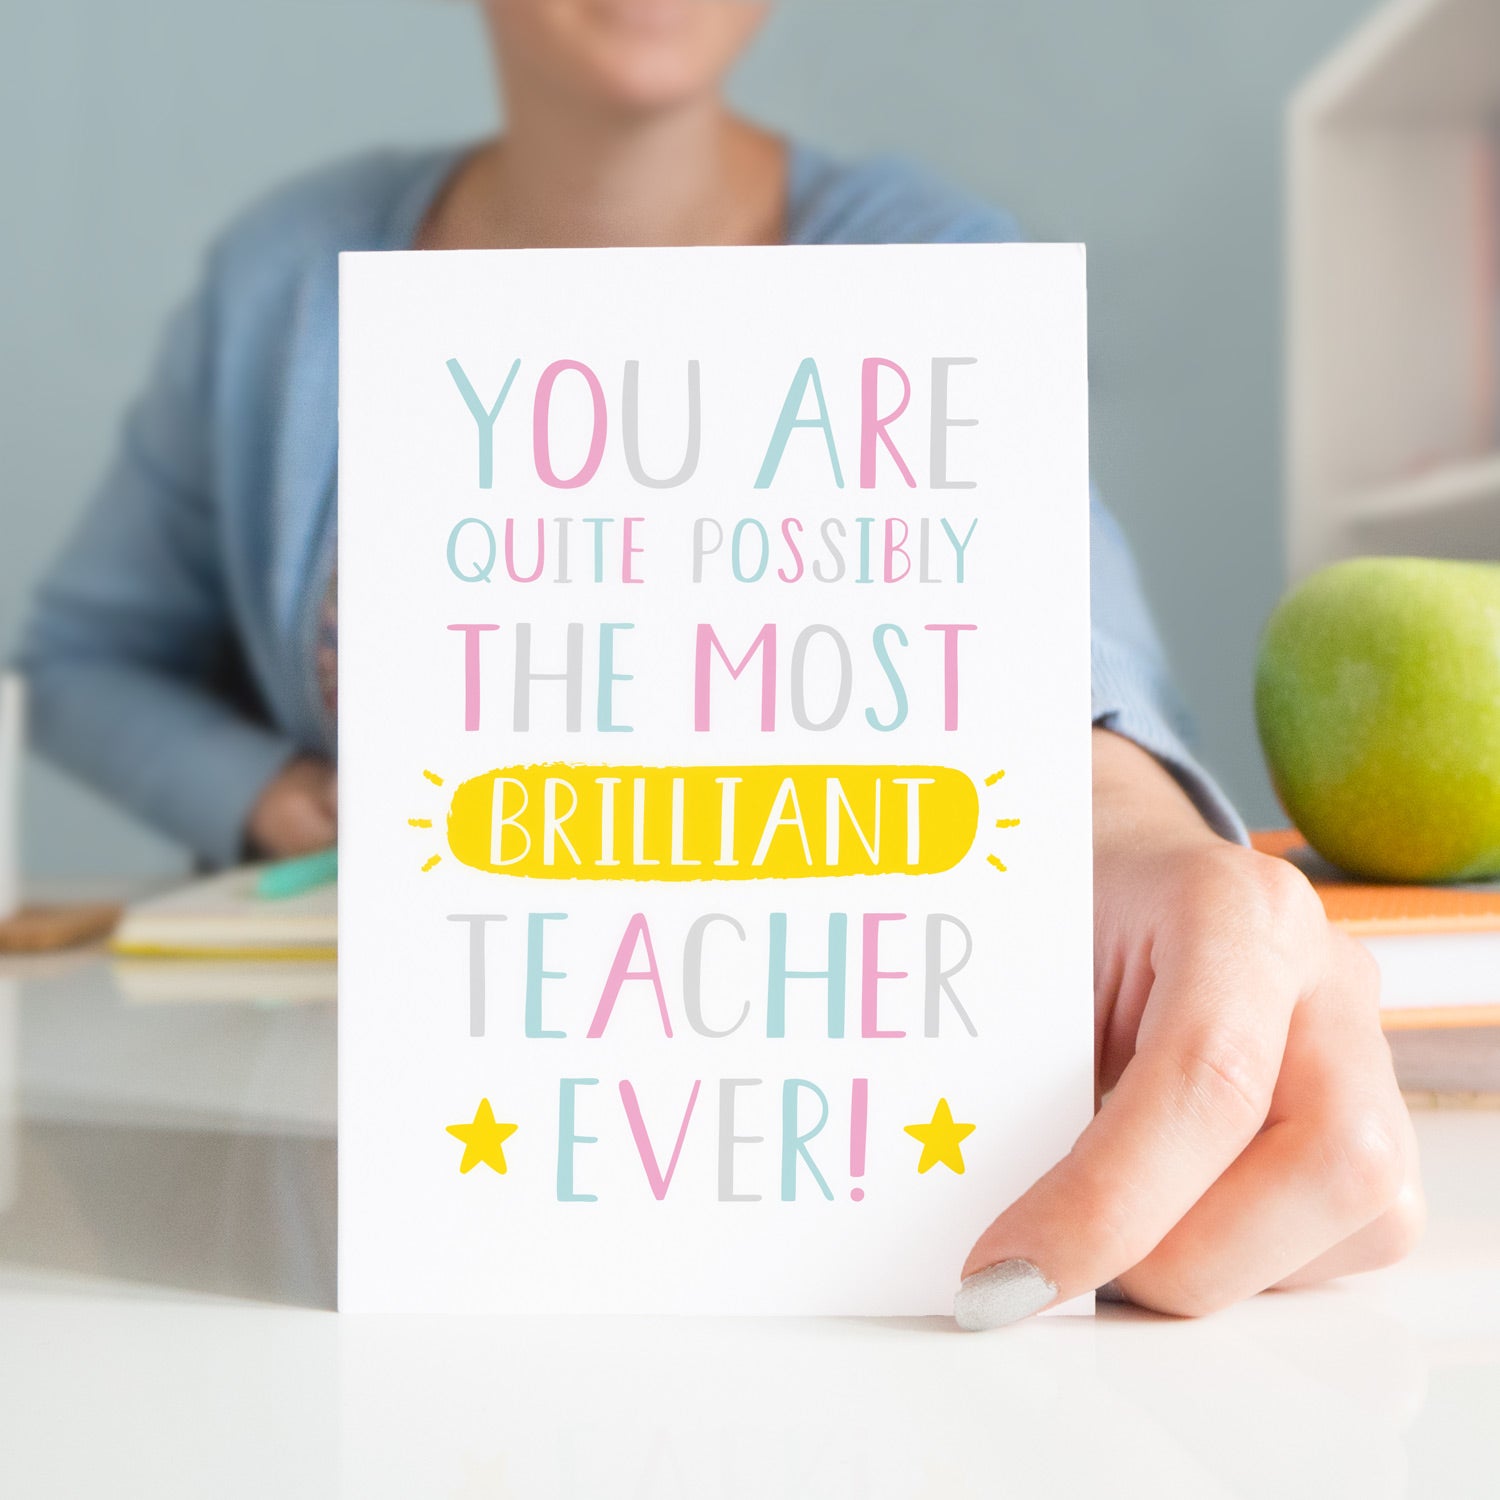 A thank you teacher card that reads "You are quite possibly the most brilliant teacher ever!" with pink, blue and grey typography with a burst of yellow!